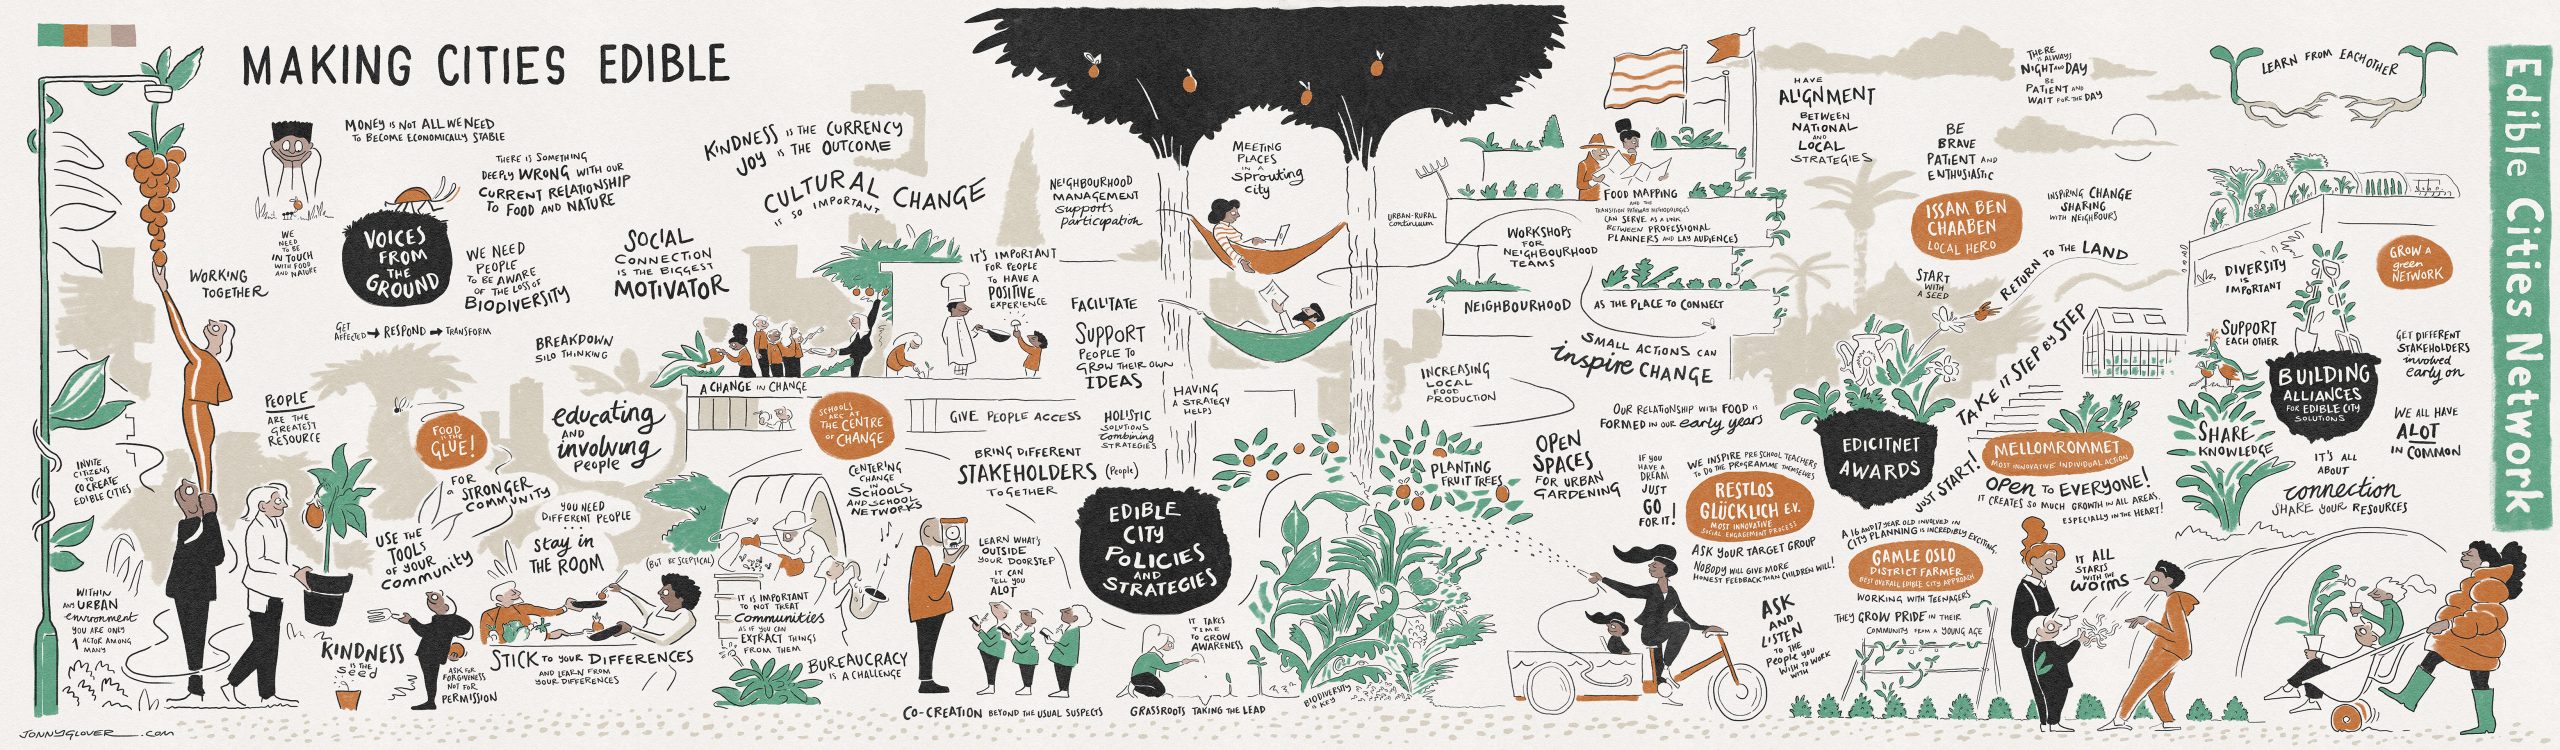 Graphic-Recording-Edible-Cities-Conference-22-Jonny-Glover-WEB-Quality